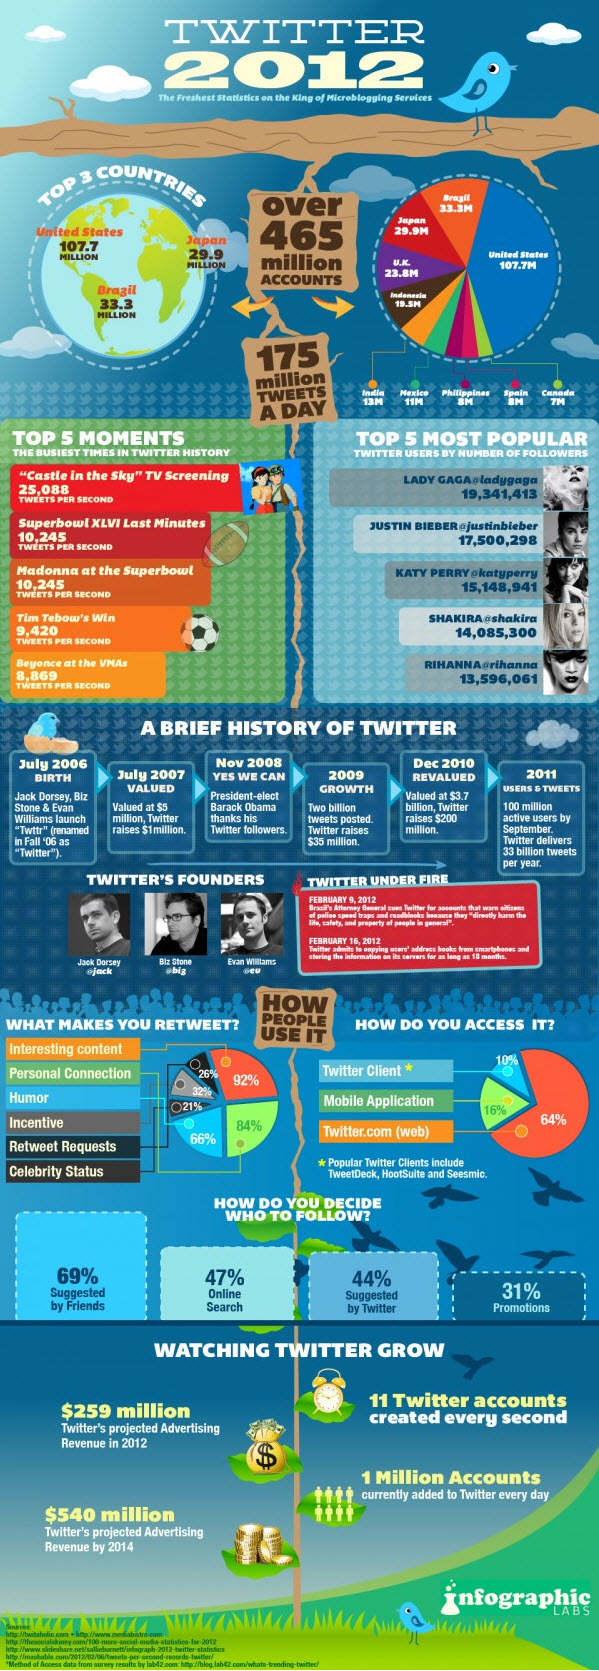 Twitter Facts Figures and Statistics 2012 Infographic